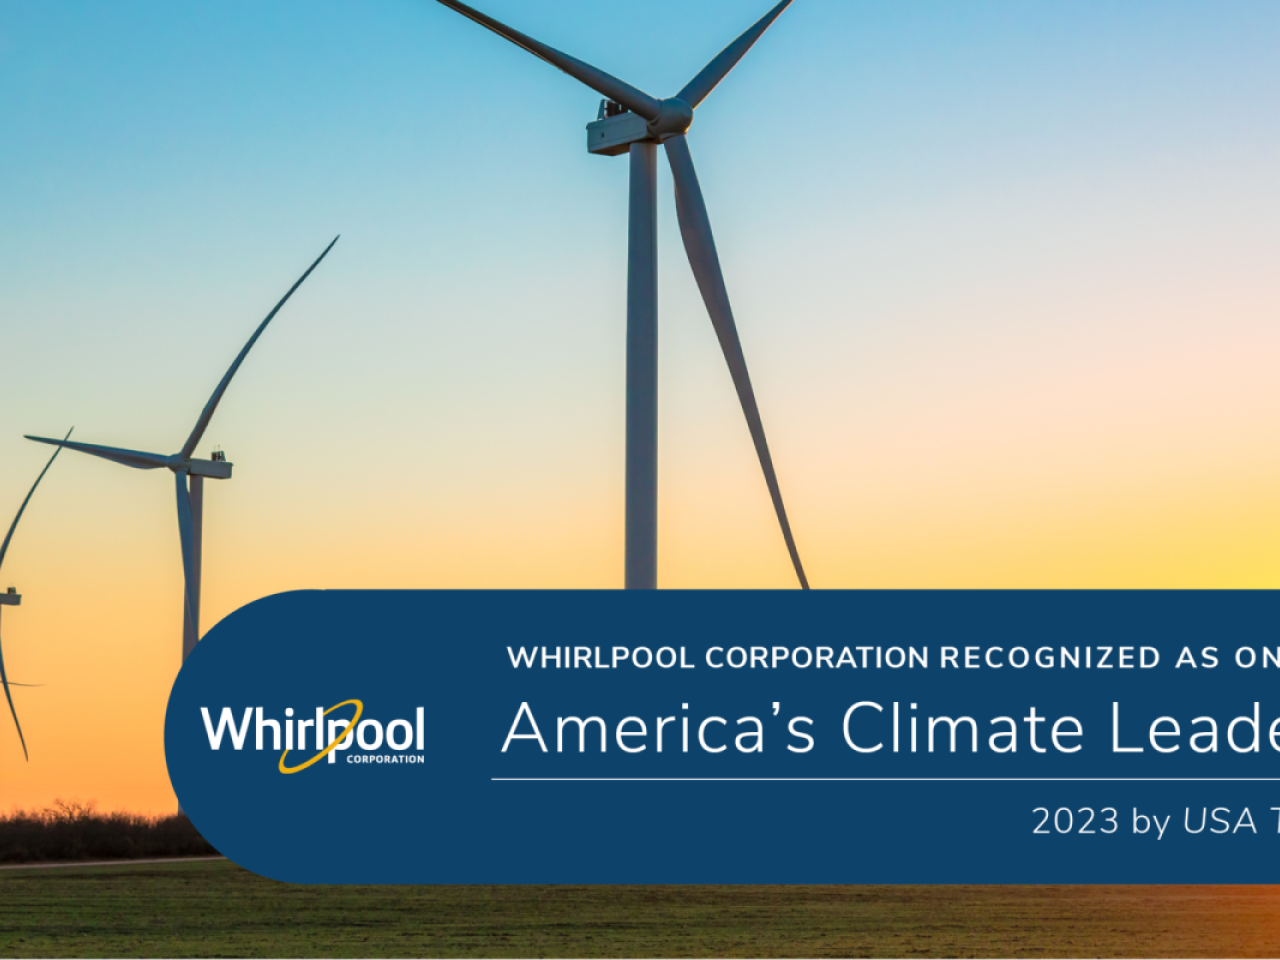 Wind turbines with Whirlpool logo and text: Whirlpool Corporation Recognized as one of America's Climate Leaders 2023 by USA Today